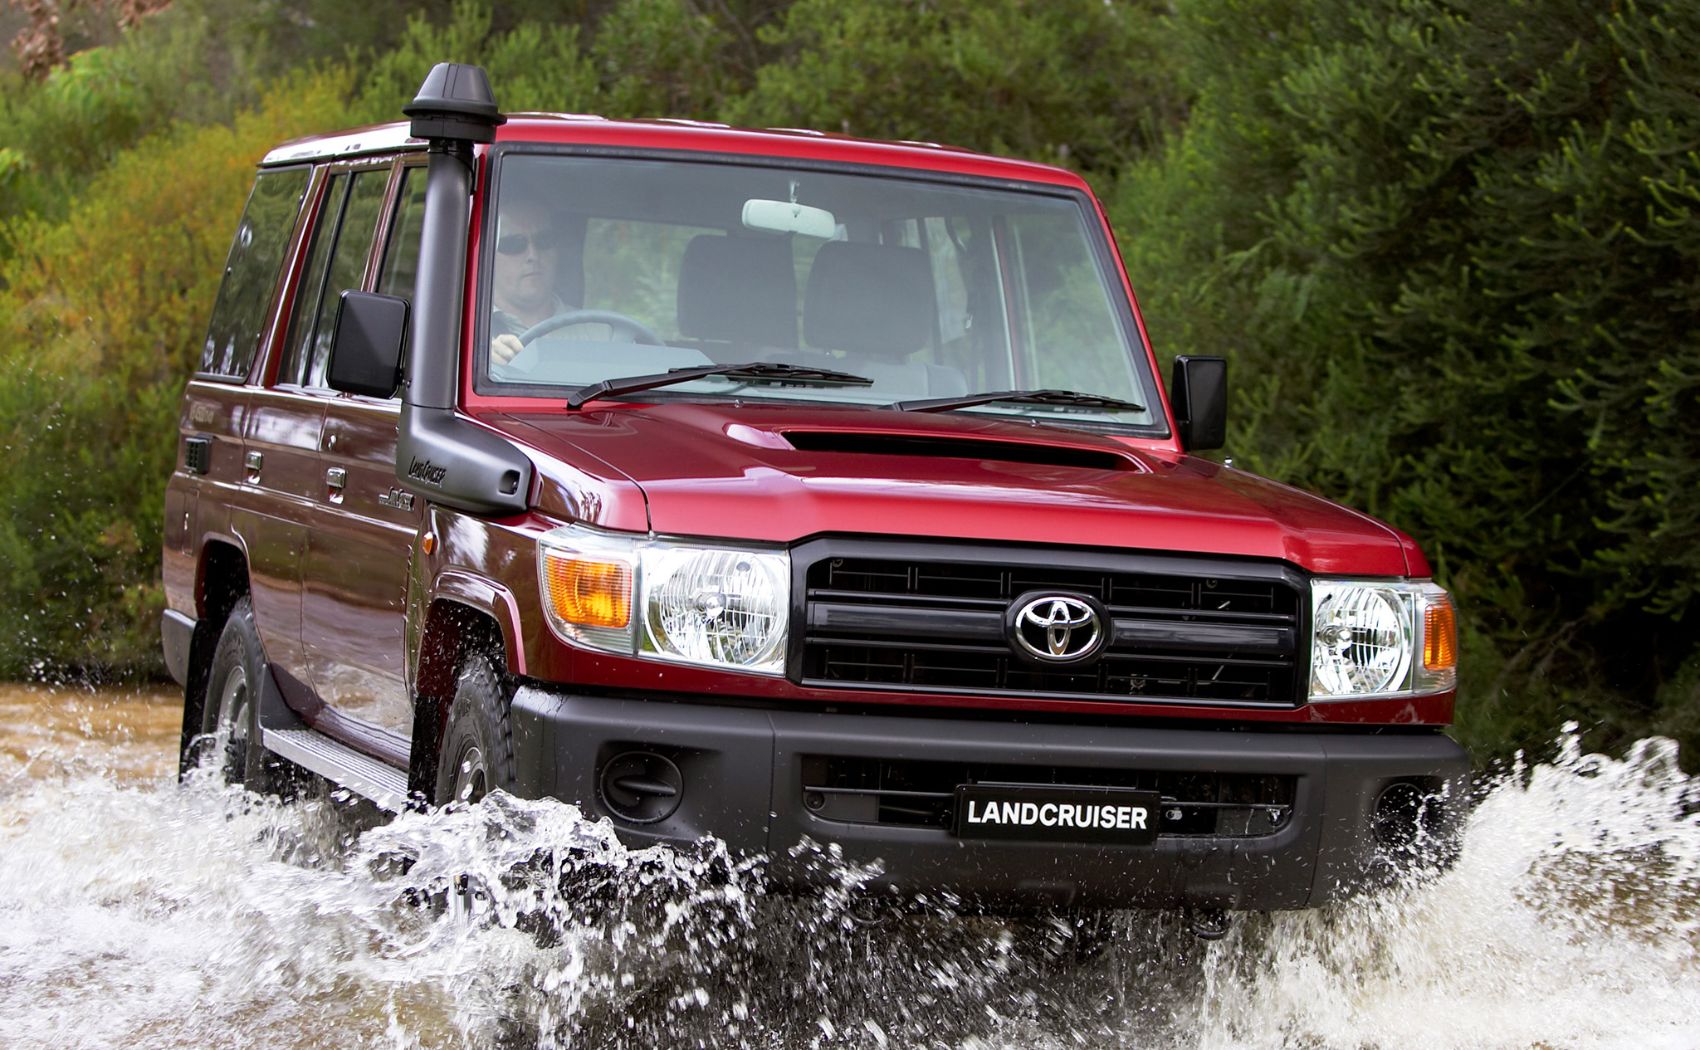 A Look at the Iconic 70 Series Land Cruiser, the Most Reliable Toyota